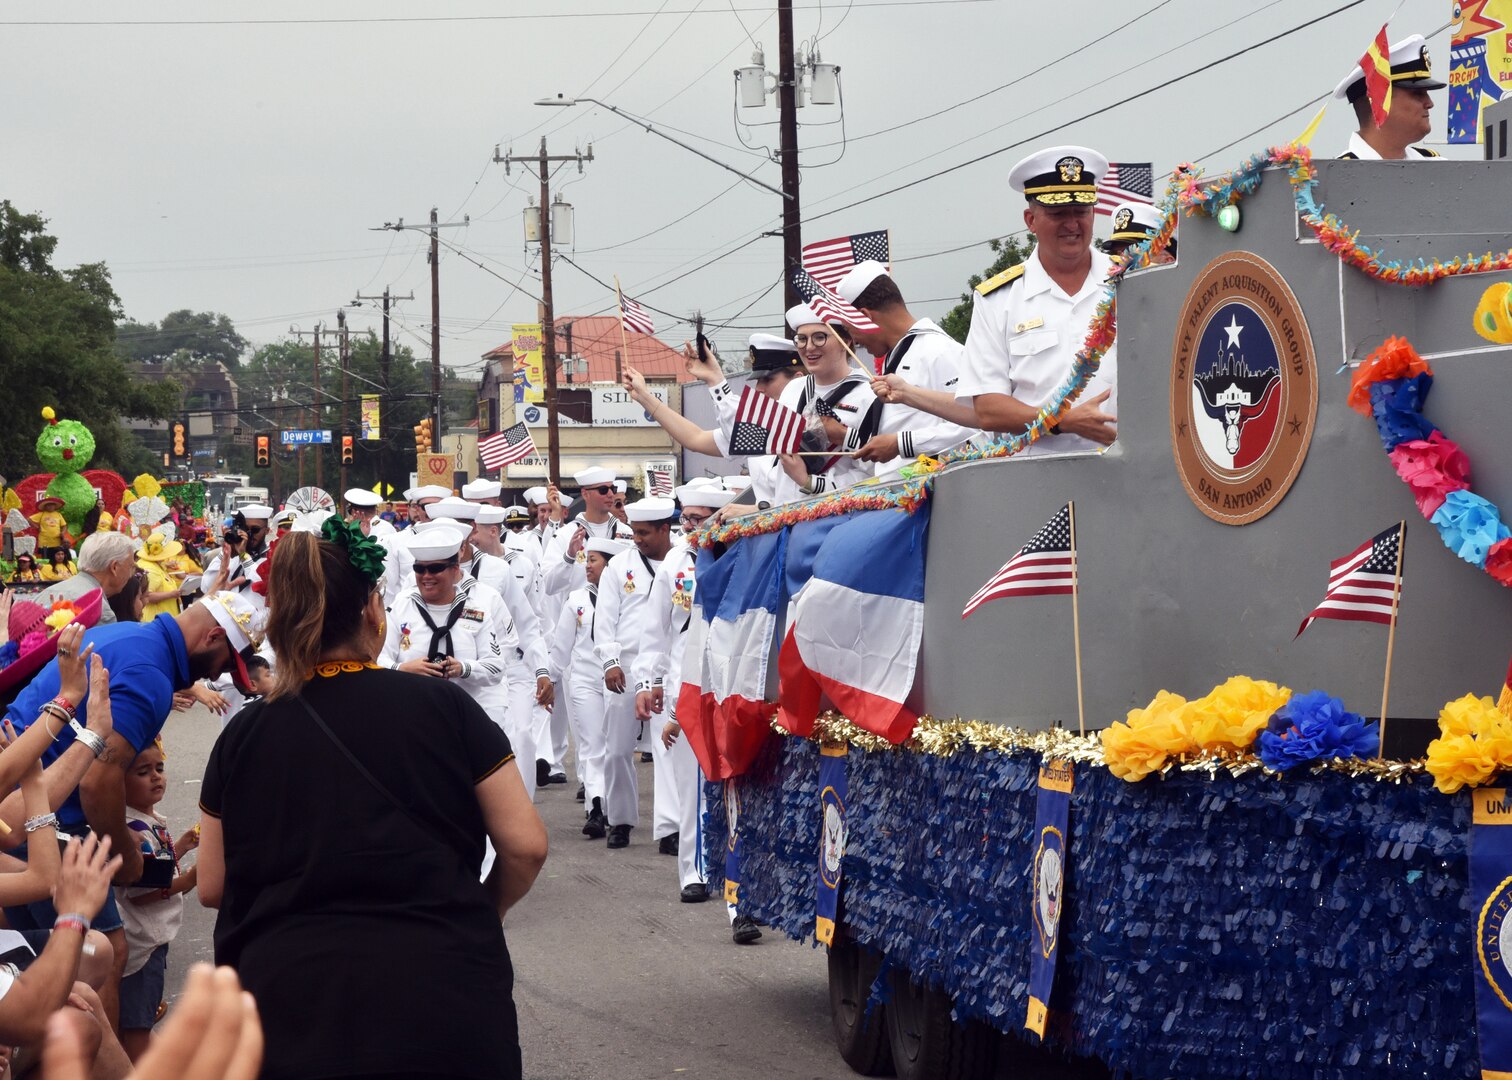 SAN ANTONIO - (April 26, 2024) – More than 100 Sailors within Joint Base San Antonio (JBSA) took part in the Battle of Flowers Parade held during Fiesta San Antonio. The Battle of Flowers Parade is the oldest event and largest parade of Fiesta San Antonio attracting crowds of more than 350,000. Leading the Sailors in the parade was Rear Adm. Walter Brafford, commander, Naval Medical Forces Support Command (NMFSC). Other commands participating included but not limited to Naval Medical Research Unit (NAMRU) San Antonio, Navy Talent Acquisition Group (NTAG) San Antonio, Navy Medicine Training Support Center (NMTSC), and Navy Wounded Warrior (NWW) Program, Navy Reserve Center (NRC) San Antonio, and USS San Antonio (LPD 17). Joint Base San Antonio is proud to be part of the diverse and vibrant community of San Antonio also known as Military City USA. (U.S. Navy Photo by Burrell Parmer, Naval Medical Research Unit San Antonio Public Affairs/Released)